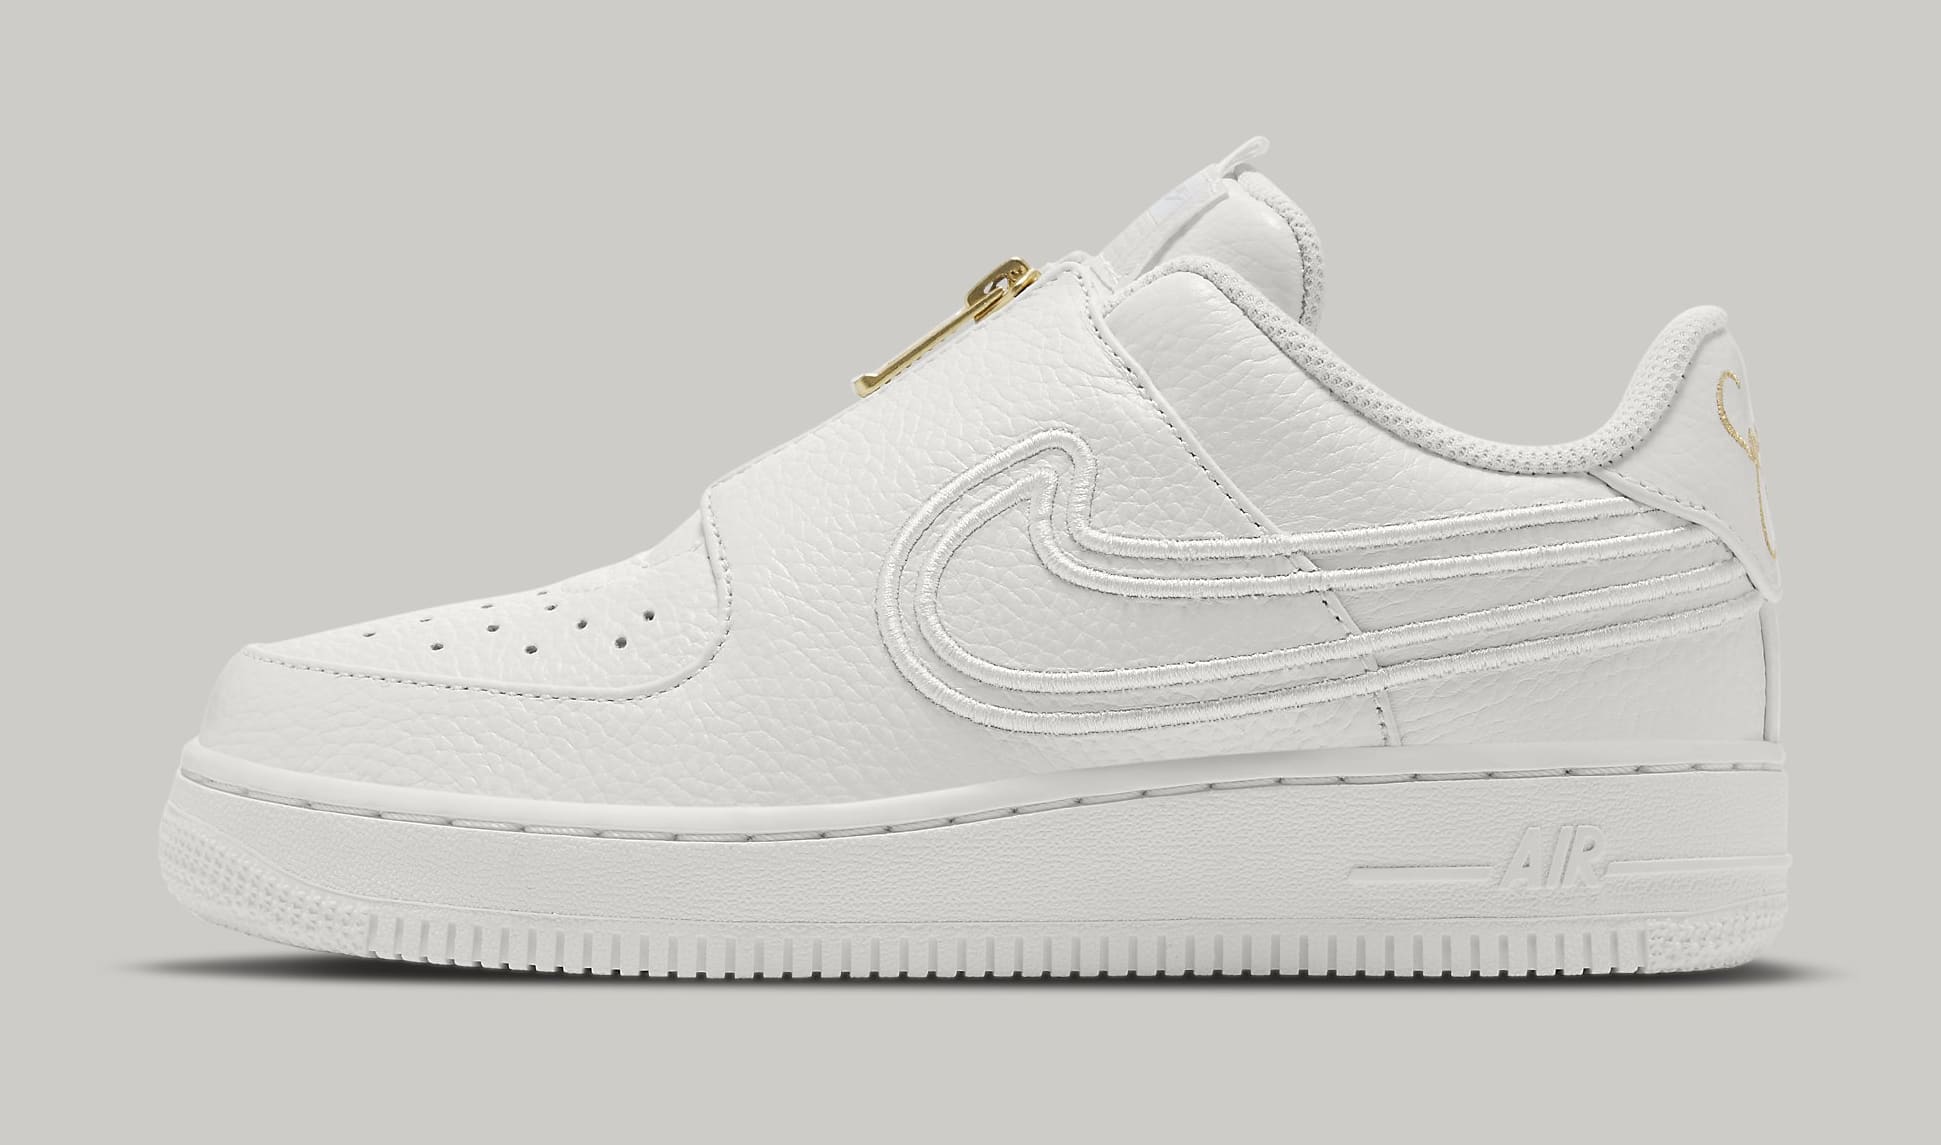 Nike Air Force 1 Serena Women's 'Summit White' DM5036 100 Lateral